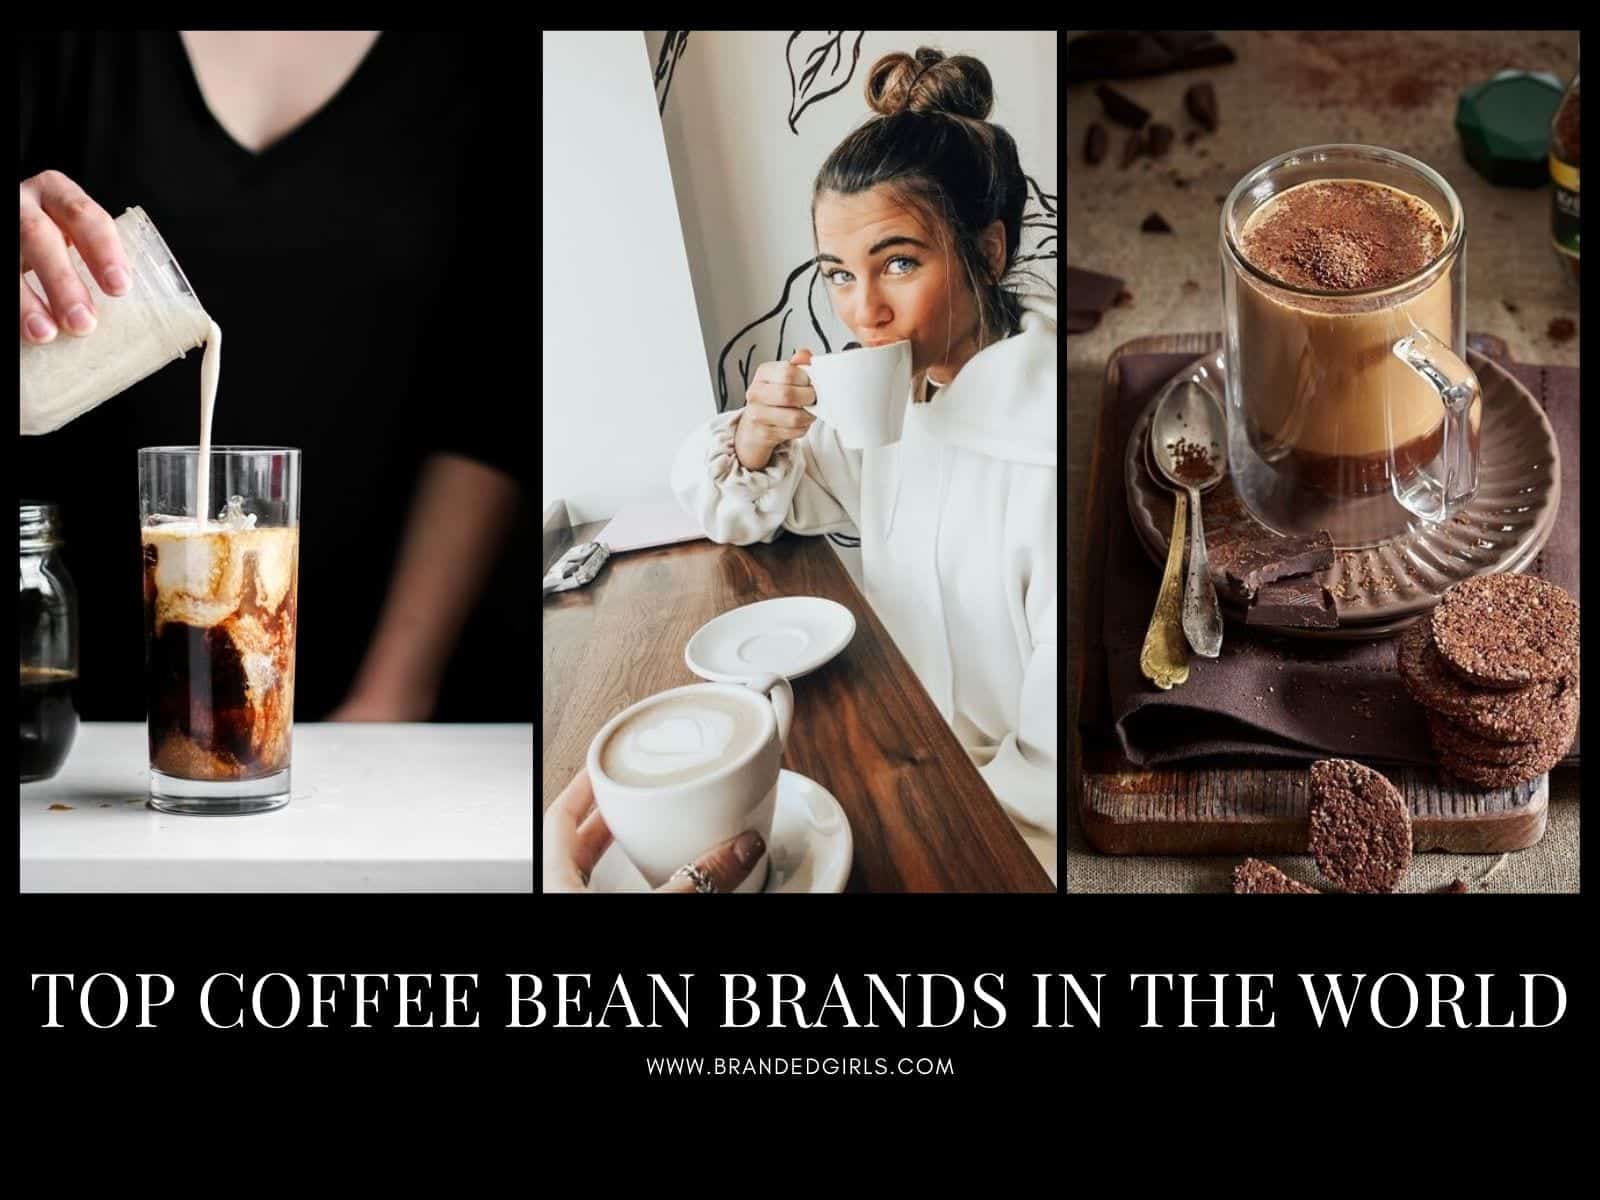 Top 10 Coffee Bean Brands In The World With Price & Specialty